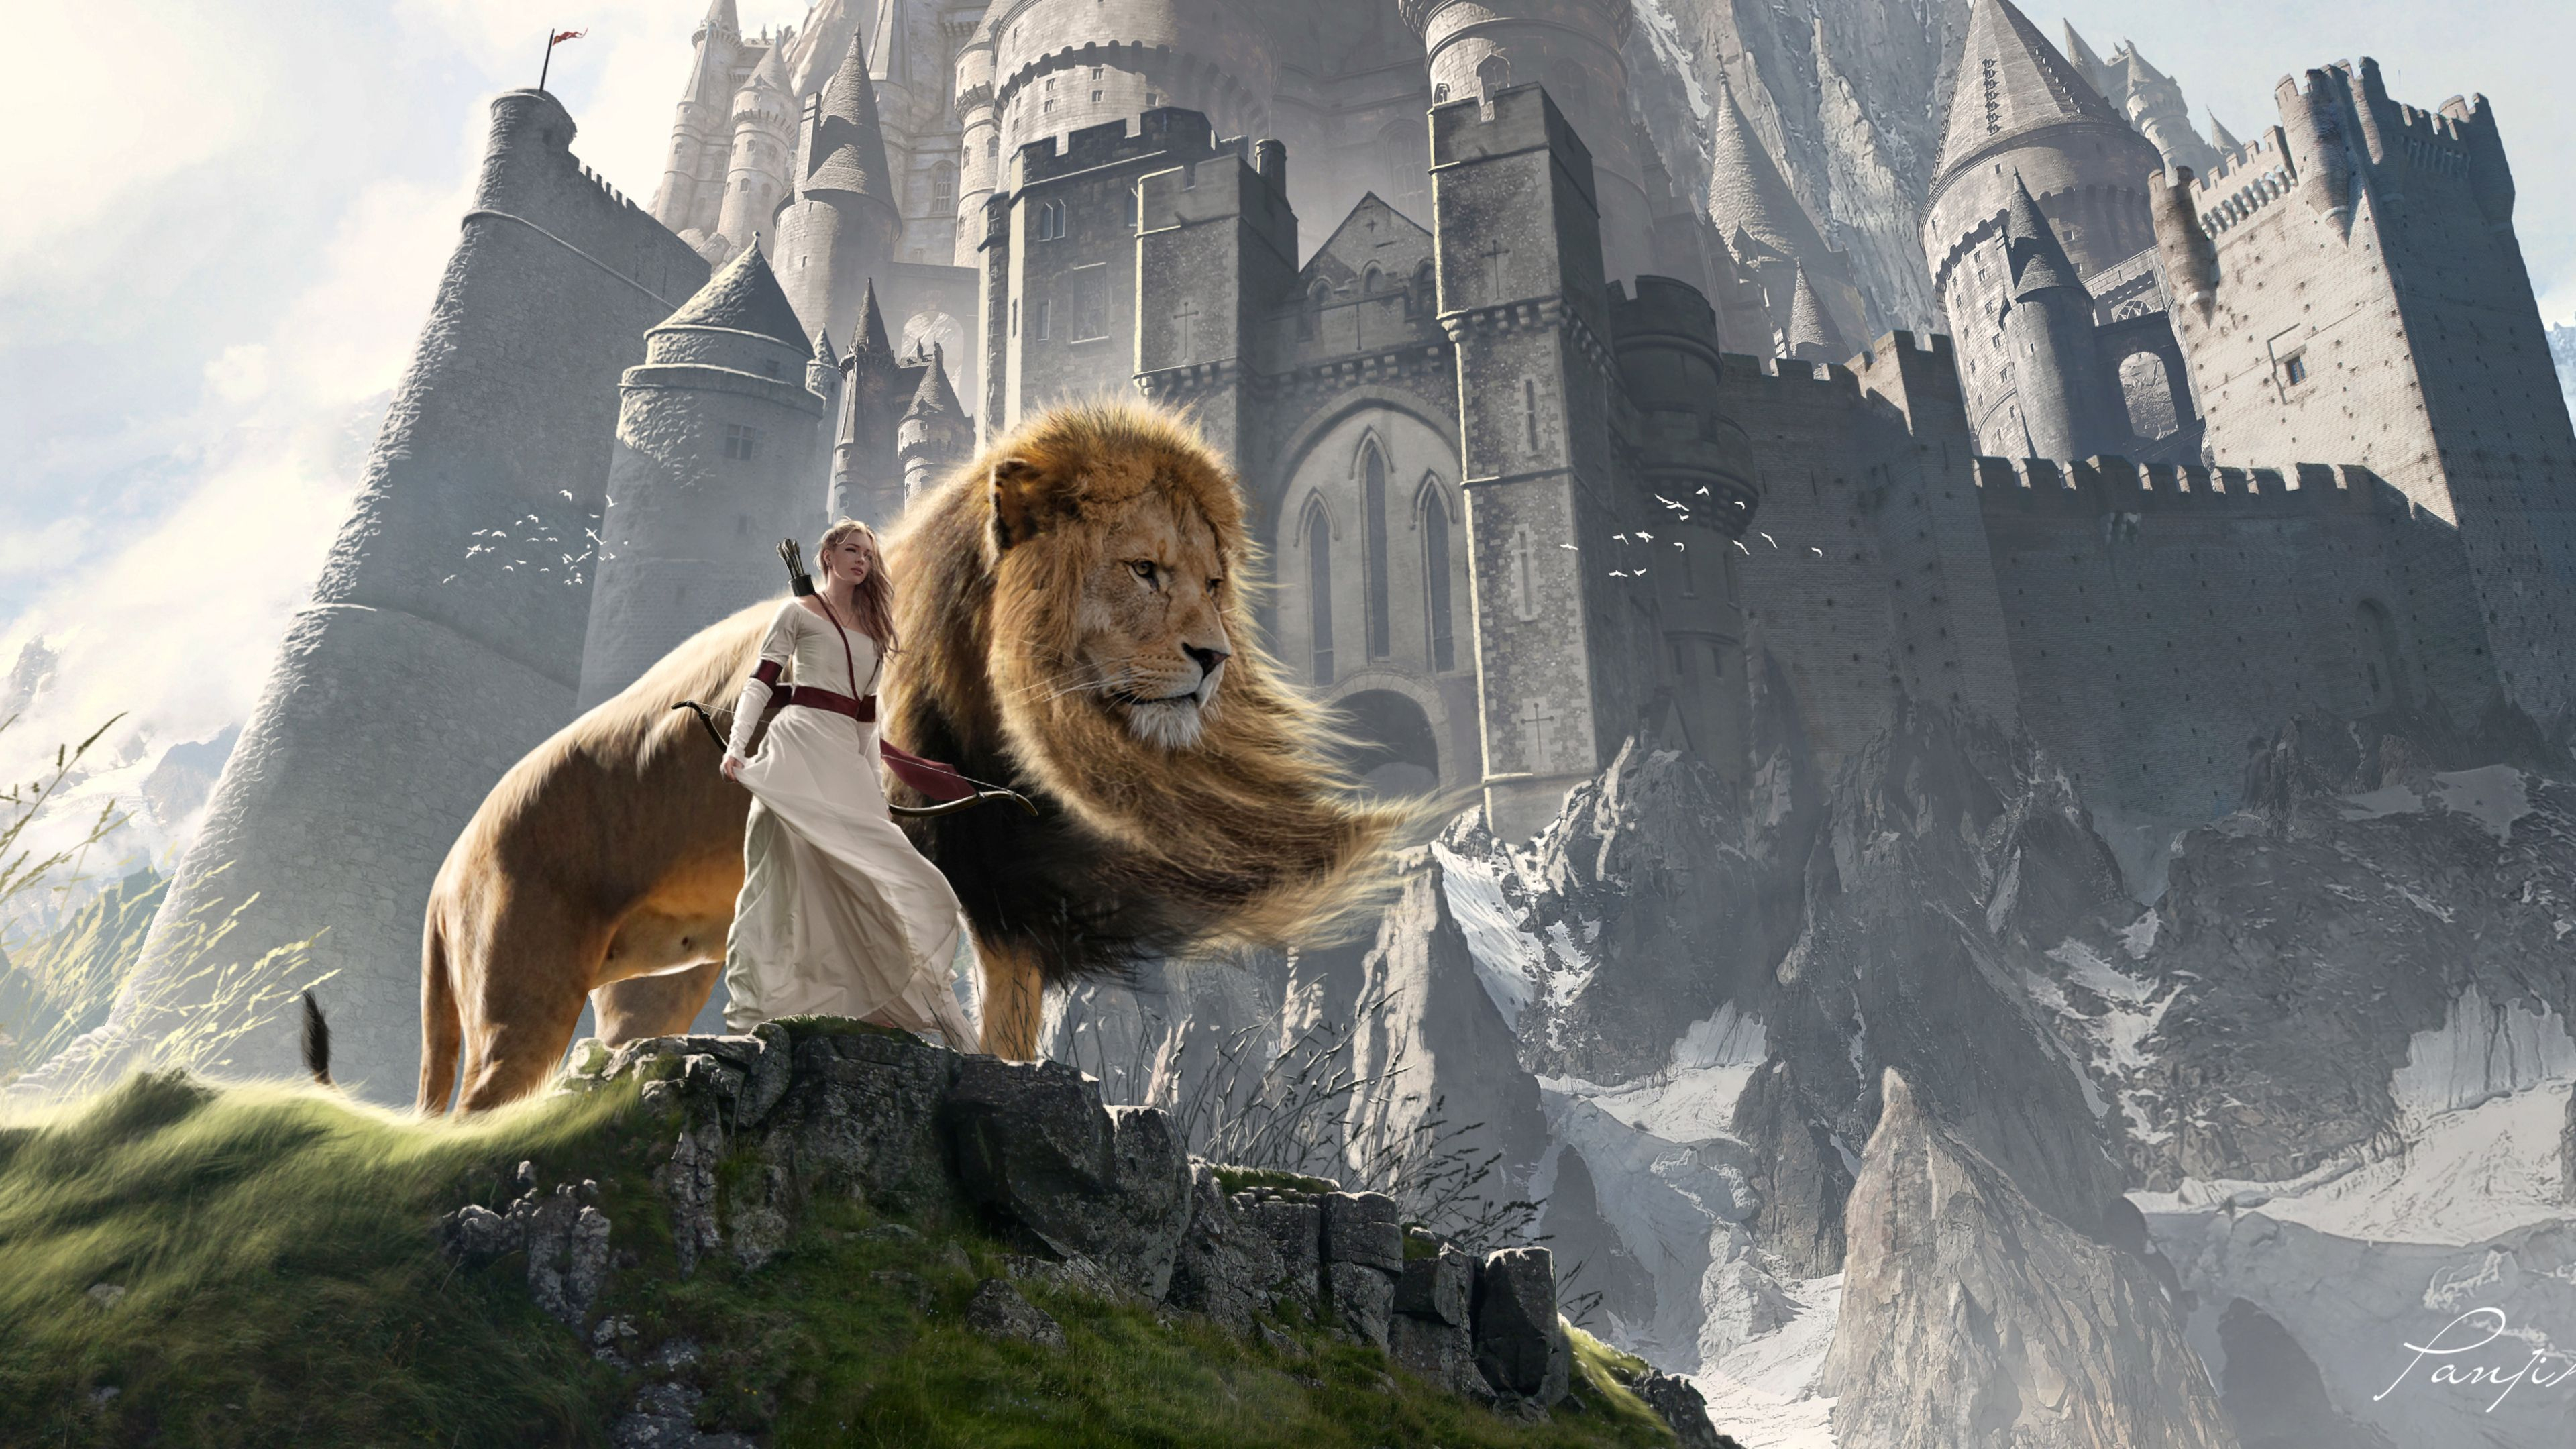 3840x2160 Susan And Aslan The Chronicles Of Narnia Extended 4k narnia wallpapers, lion wallpapers, hd-wallpapers, fantasy wallpa&acirc;&#128;&brvbar; | Chronicles of narnia, Narnia, Aslan narnia